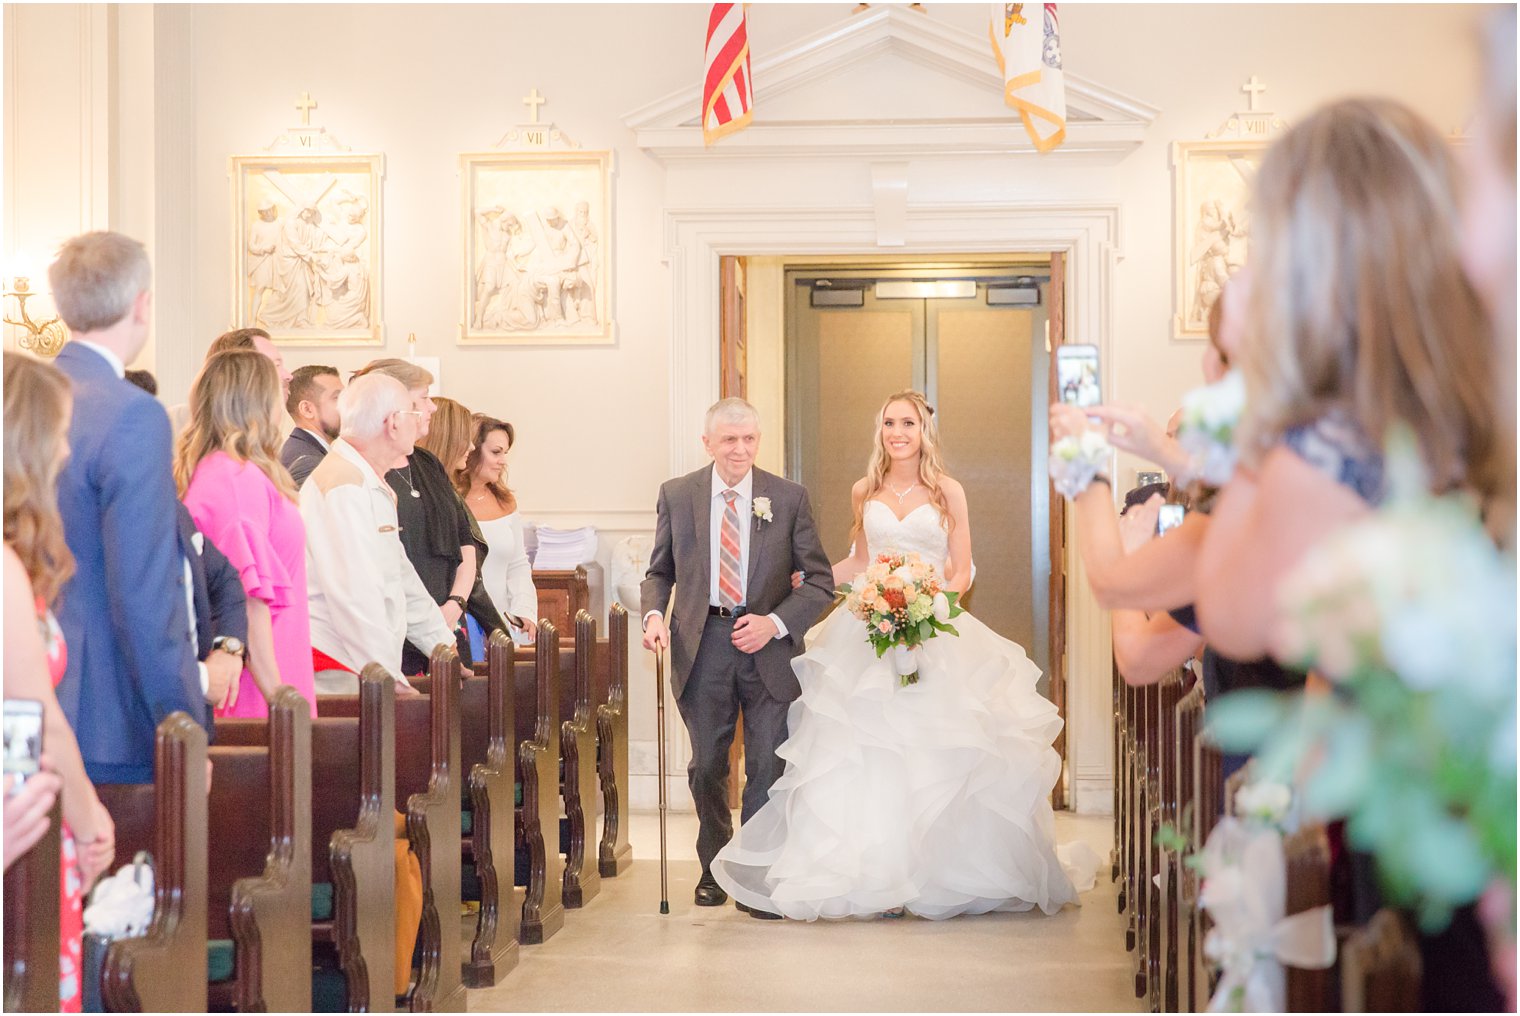 Bride walking down the aisle at St. Catharine's Church in Spring Lake, NJ